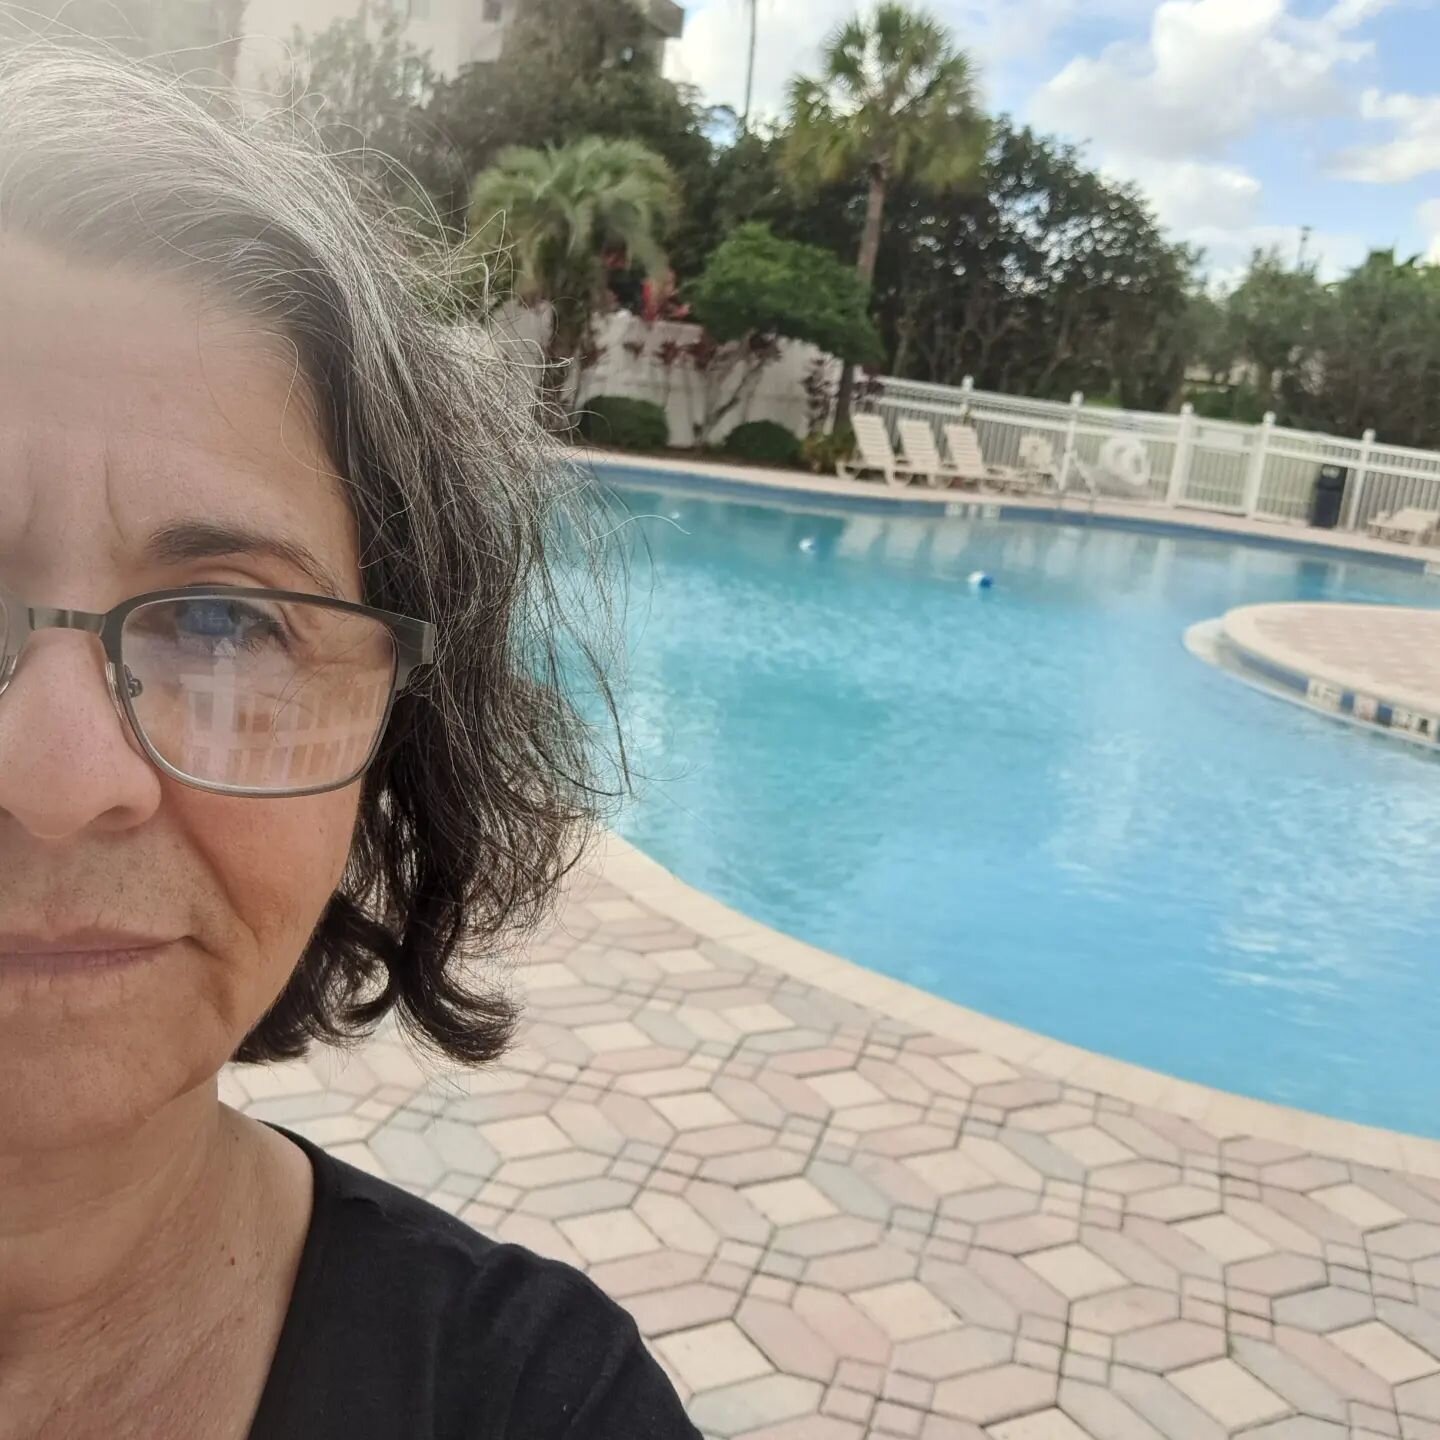 No trip to FL would be complete without a dip in the pool 😎🥰💜 🤽🏖️
#itsthelittlethingsthatcount